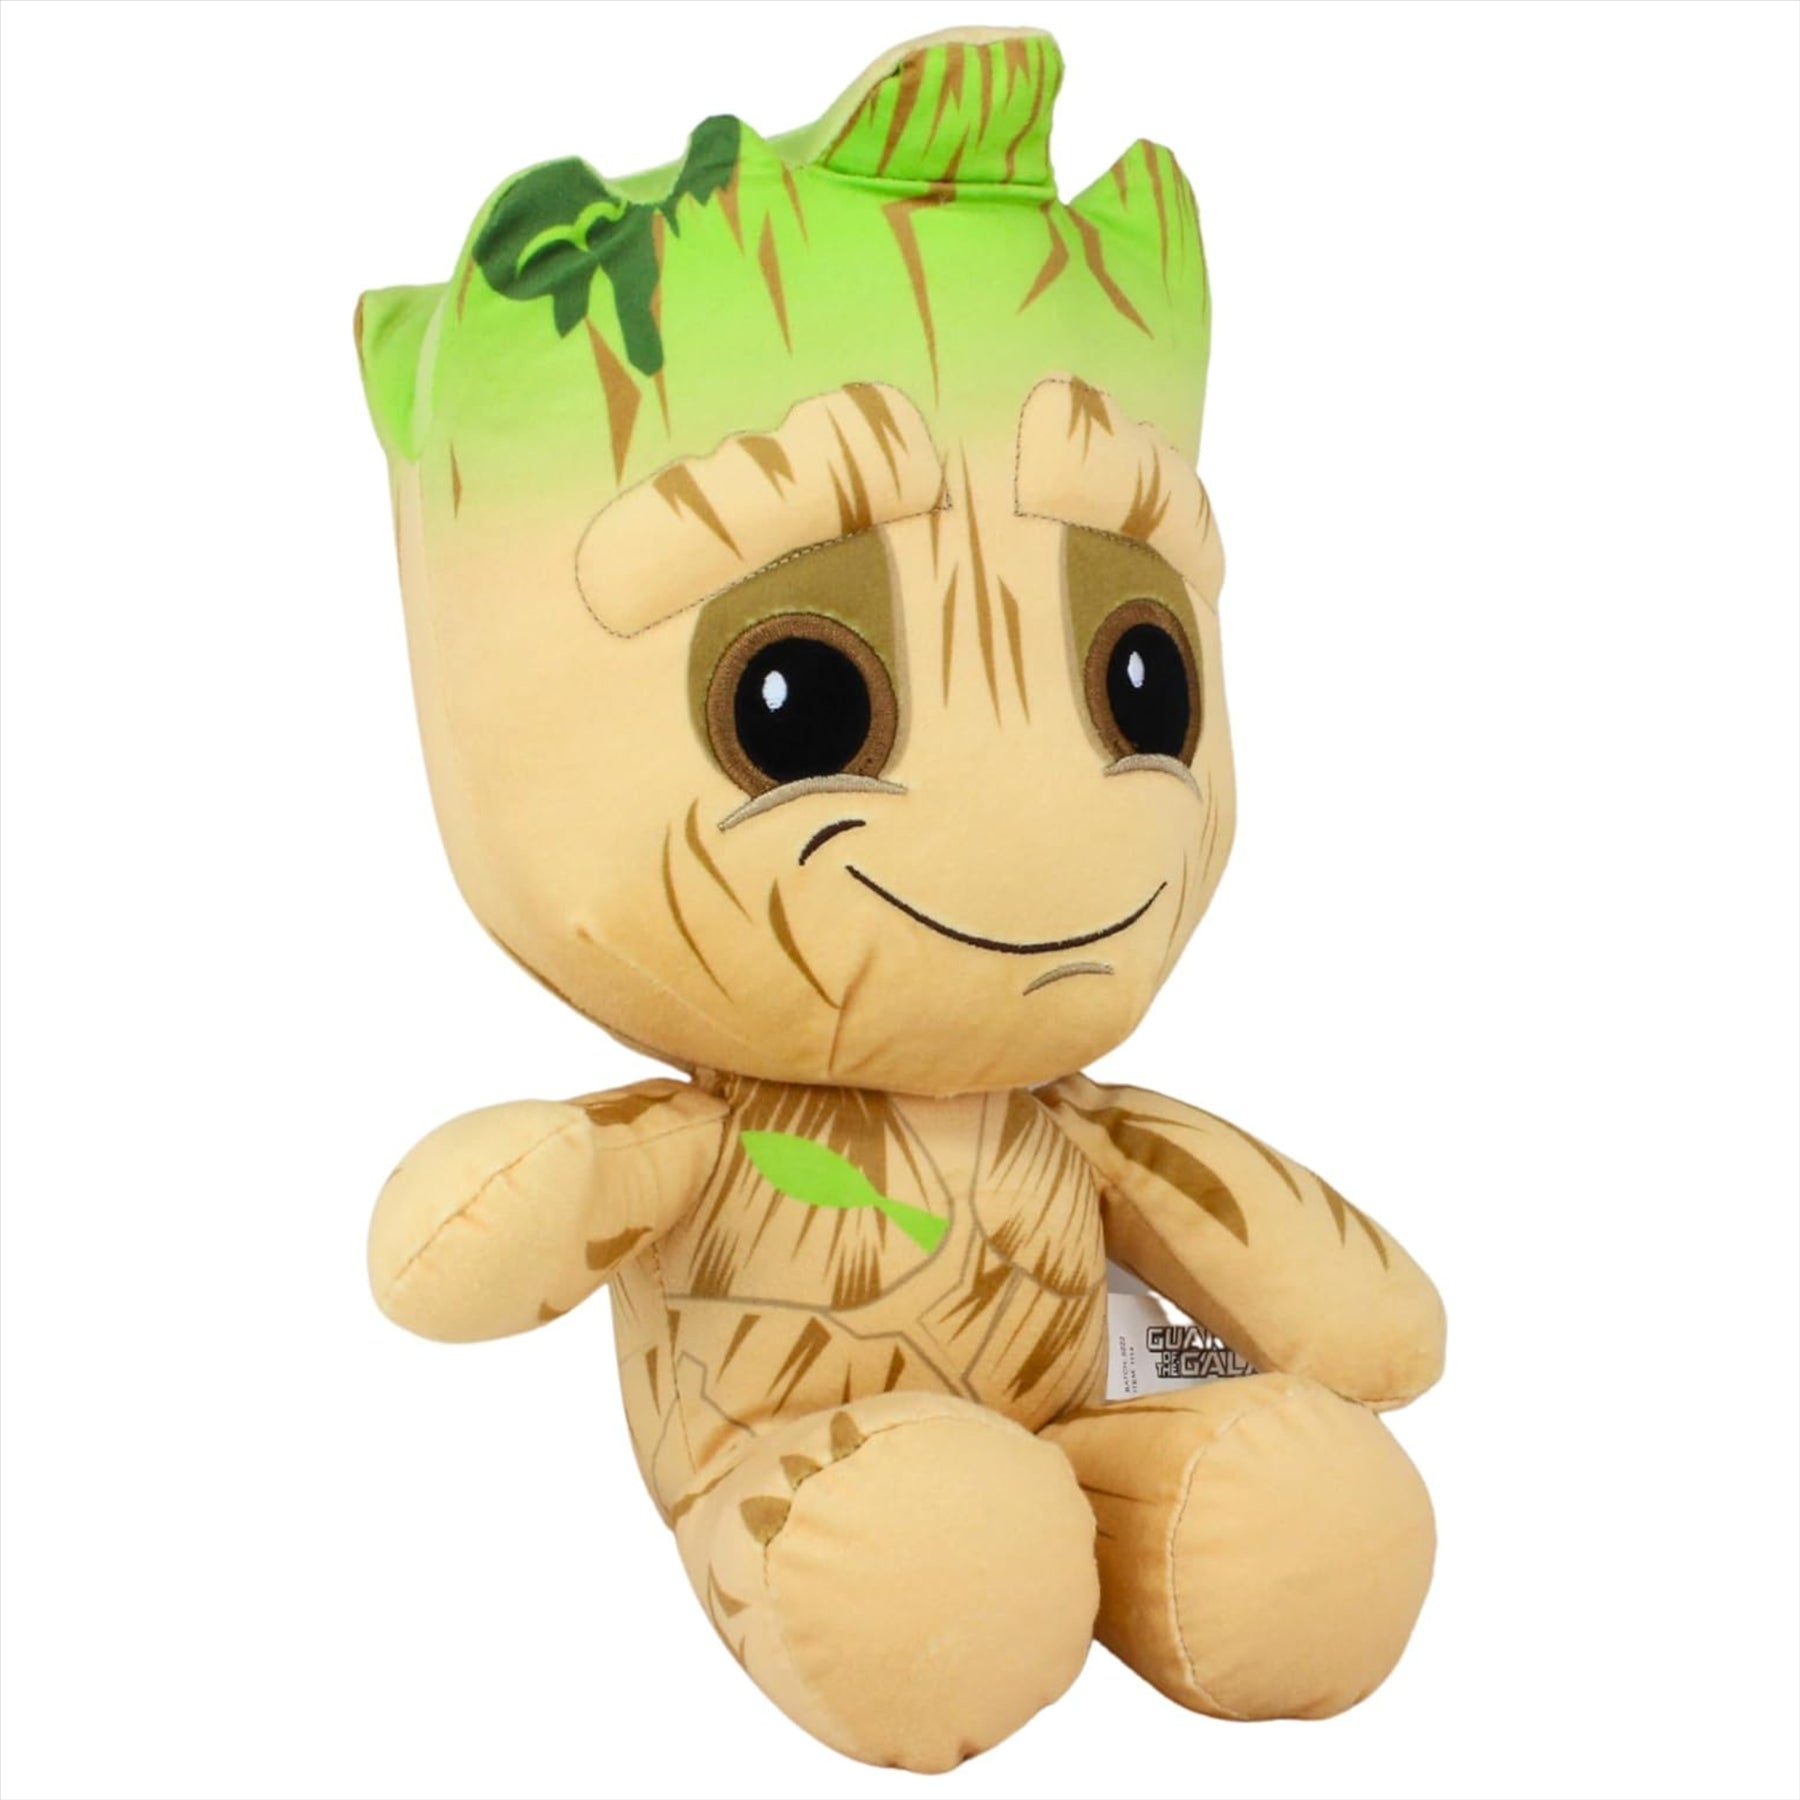 Guardians of the Galaxy Avengers Groot Super Soft Embroidered 36cm Plush Toy